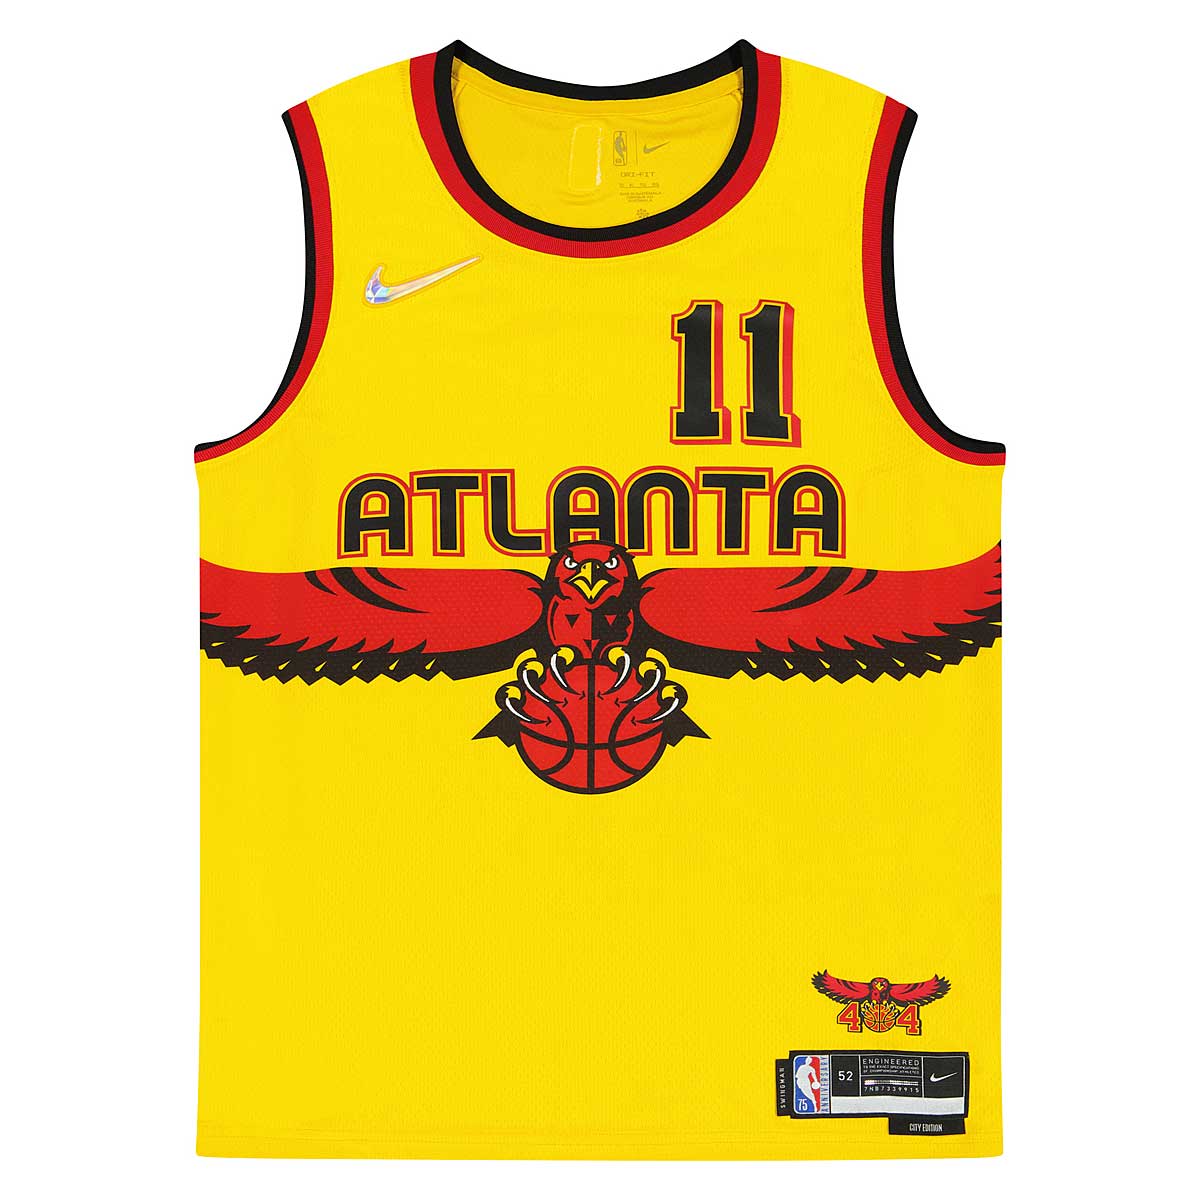 trae young jersey in store